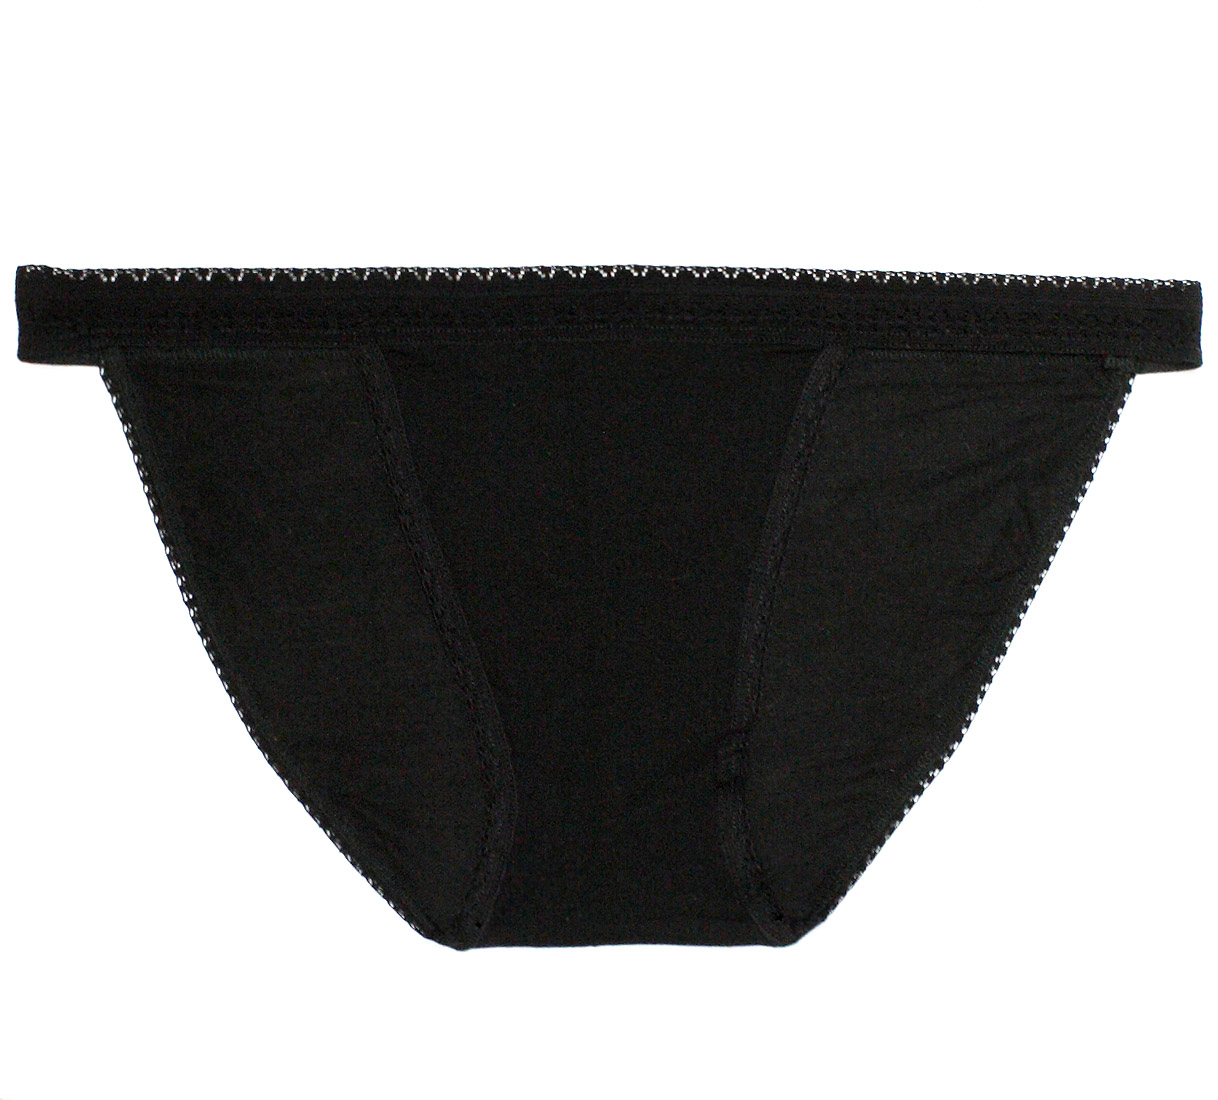 Basic Play Black Modal Underwear & Daywear | Fine Lingerie for Everyday | Between the Sheets Designer Intimates 